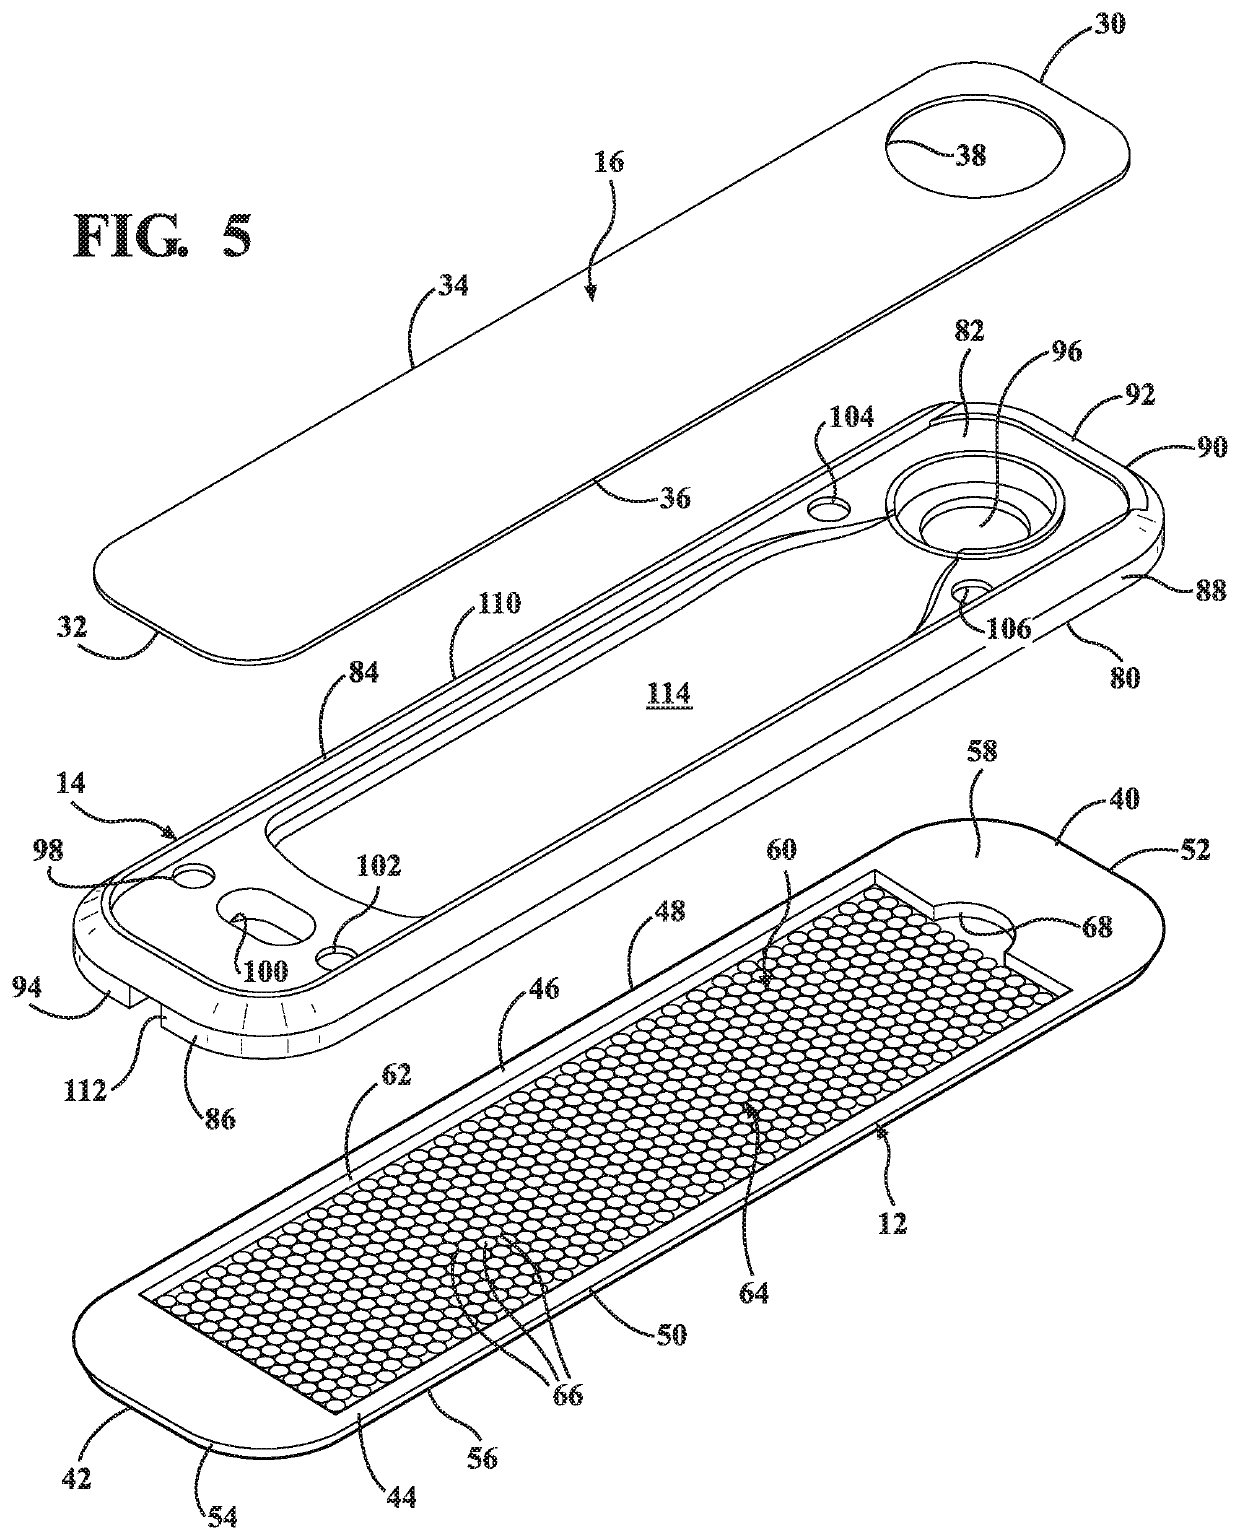 Device for smoking tobacco and other inhalation materials